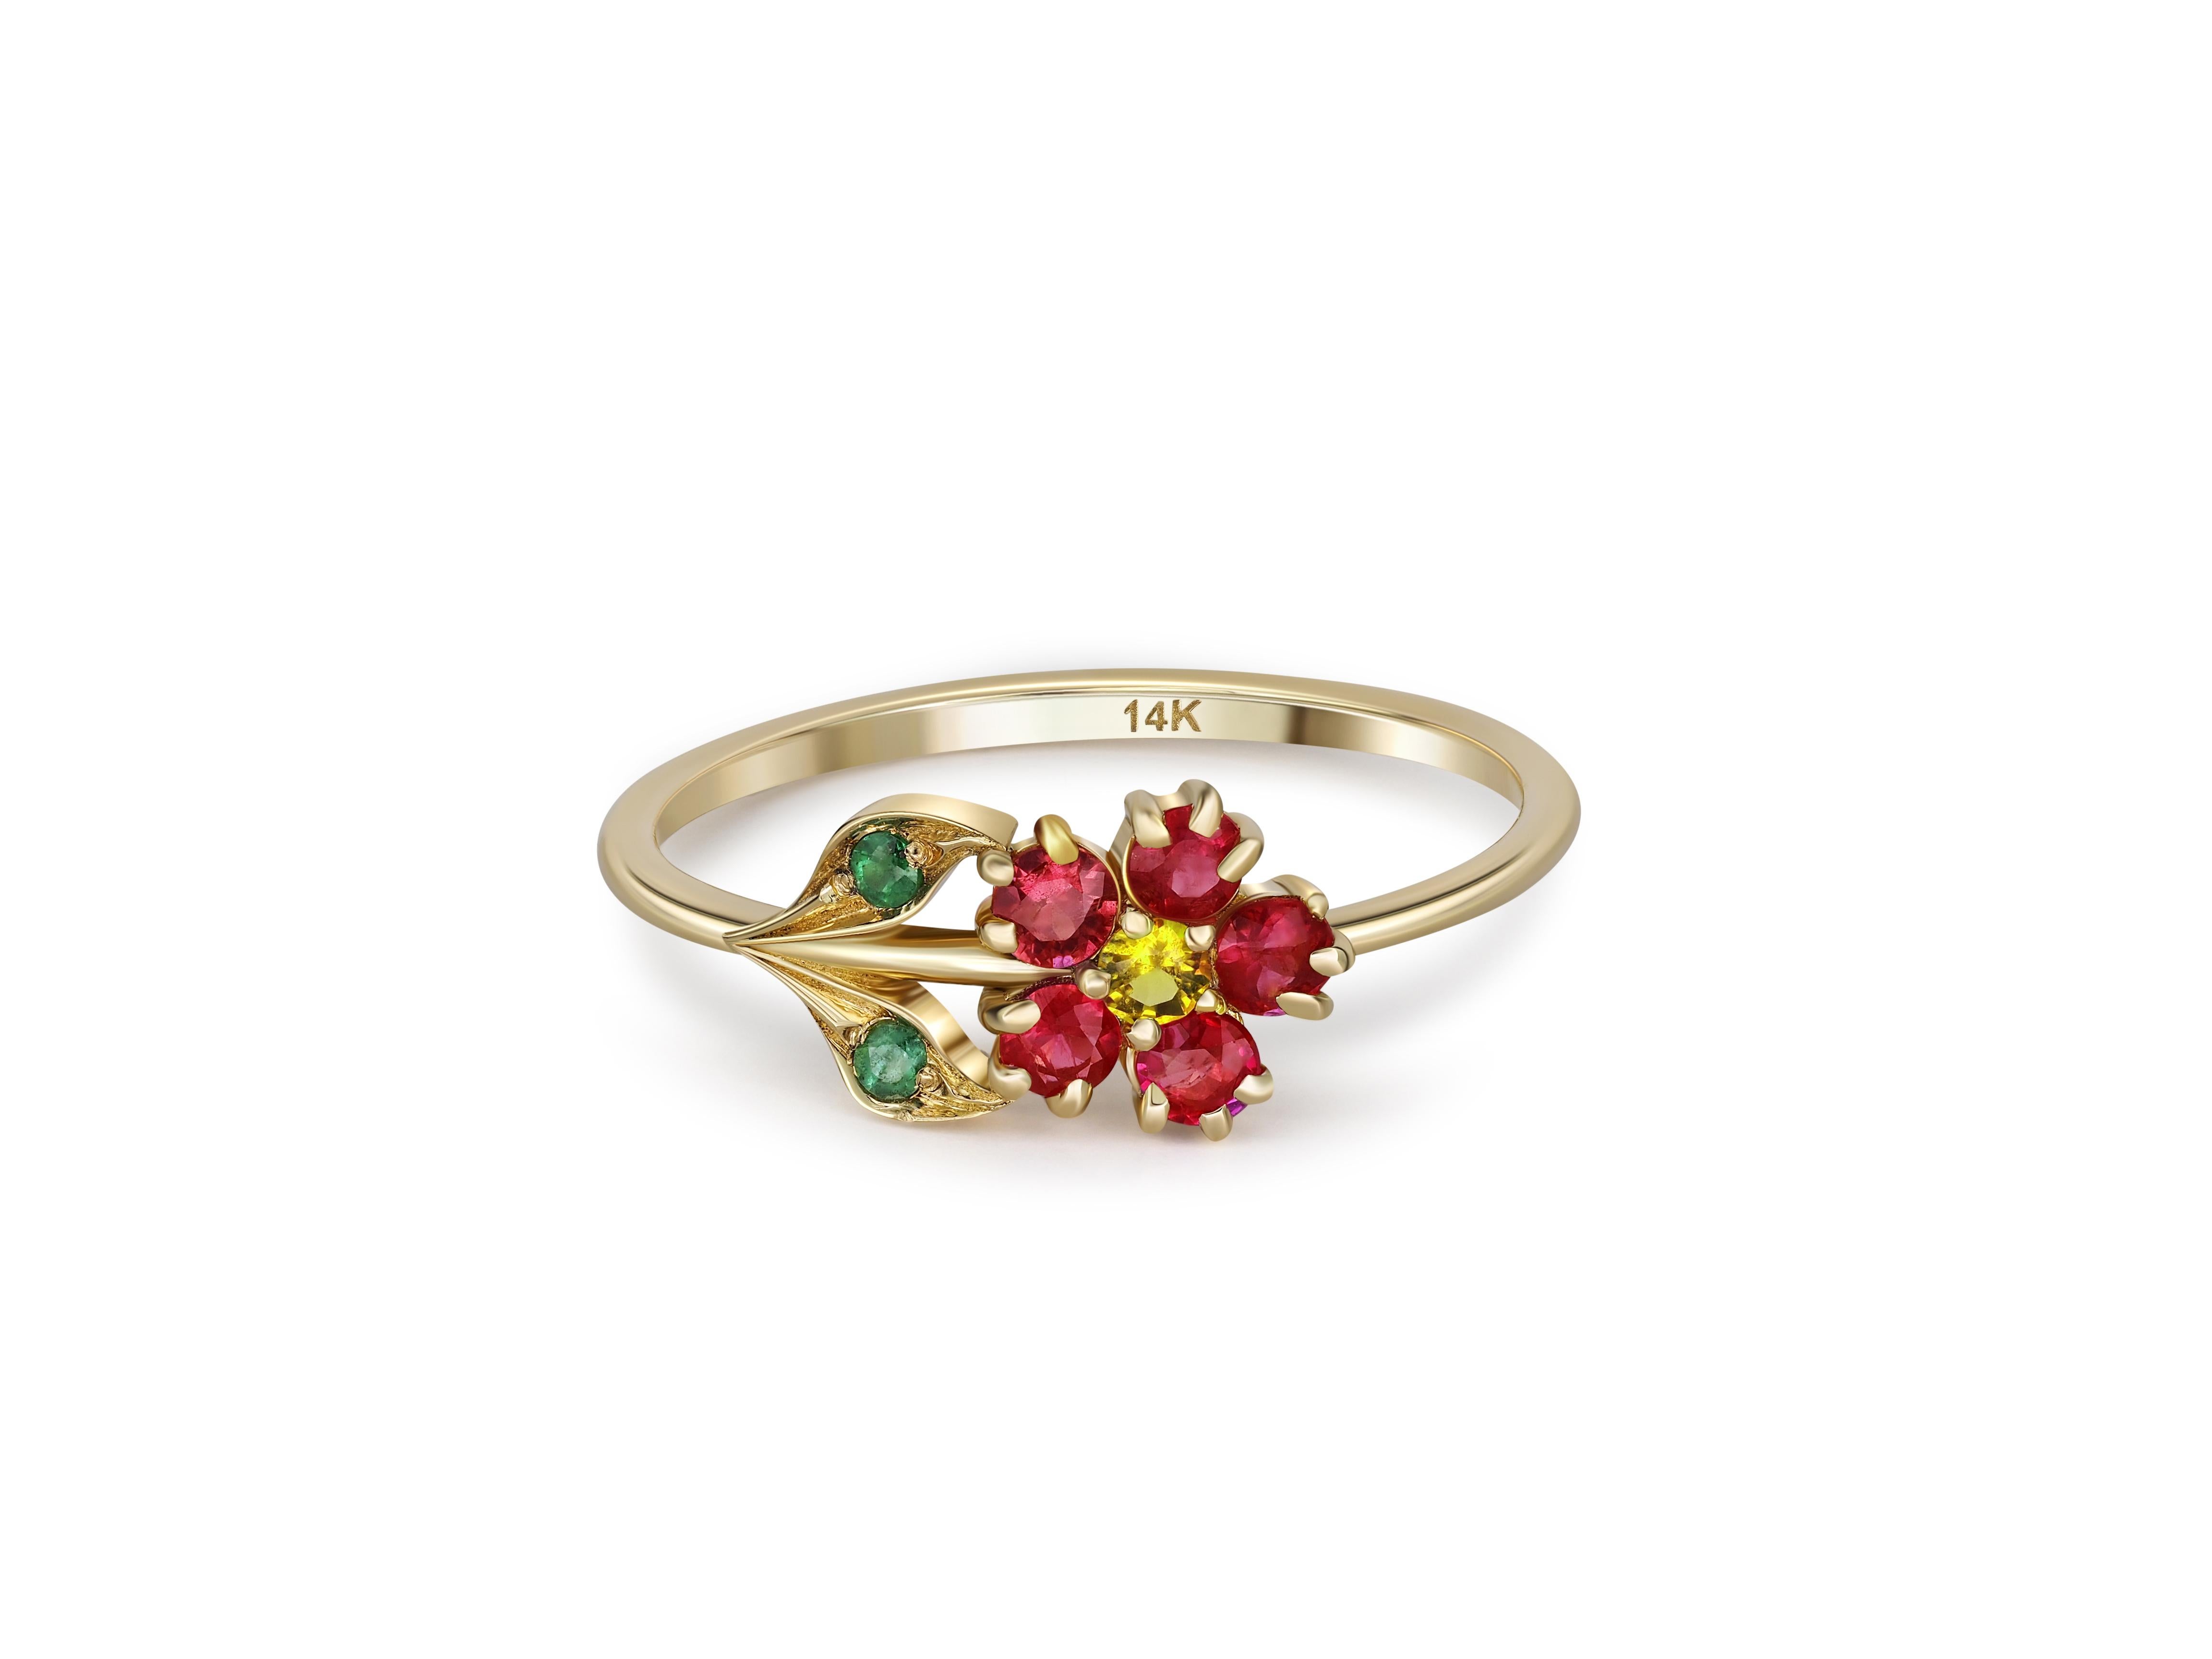 Flower Ring in 14 Karat Gold, Sapphire, Garnet and Chrome Diopsides Ring.  For Sale 1